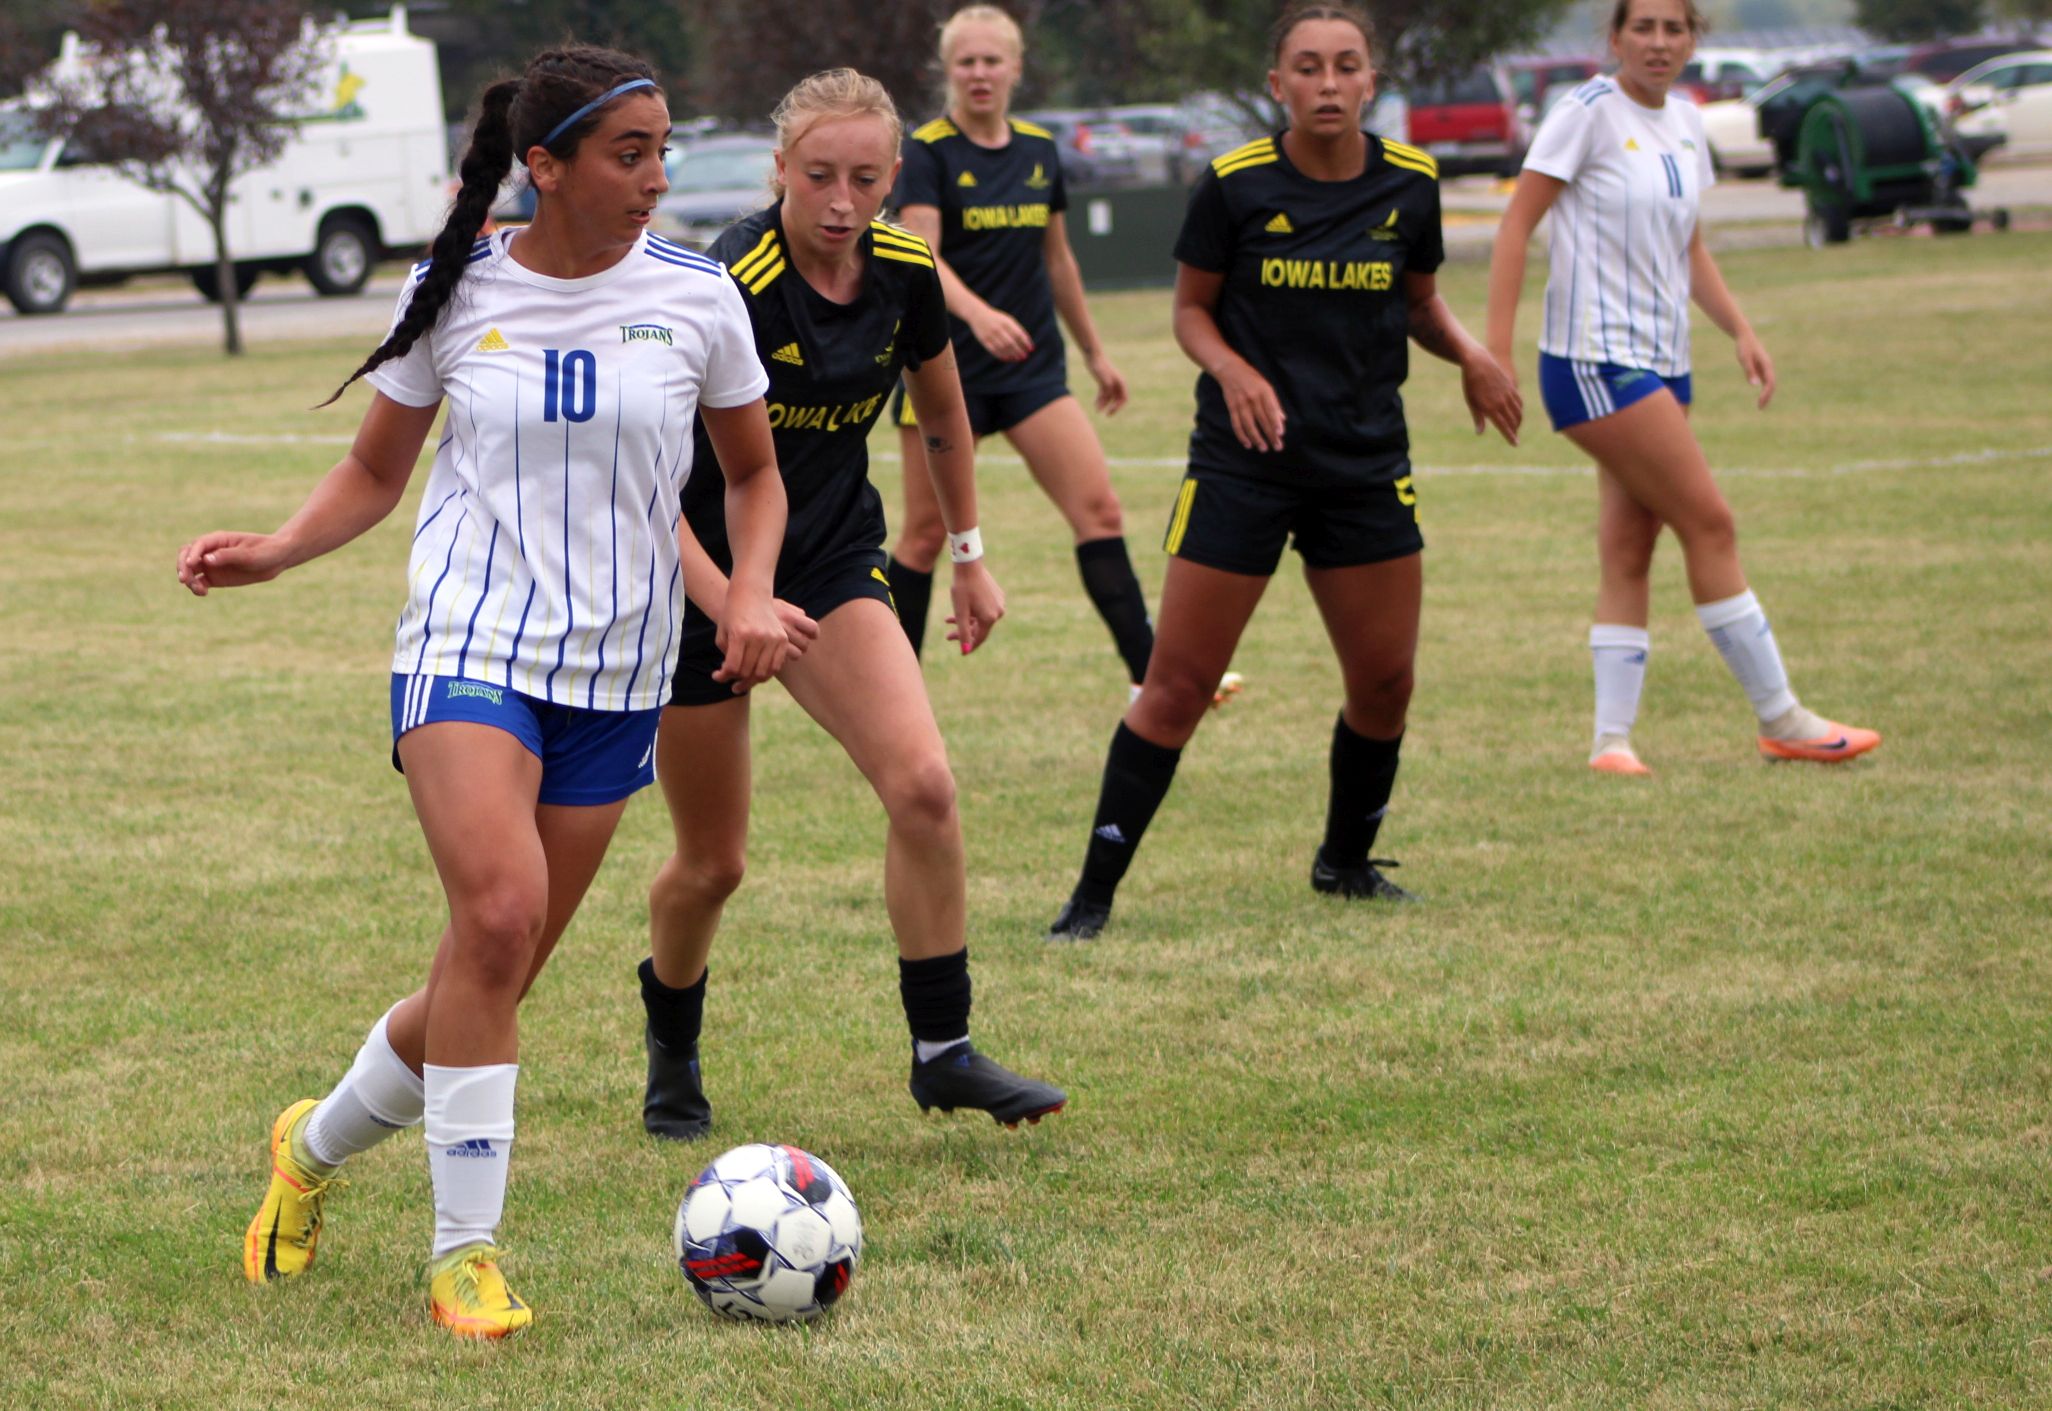 NIACC's Gabriella Rivera looks to move the ball downfield in Wednesday's match against Iowa Lakes.